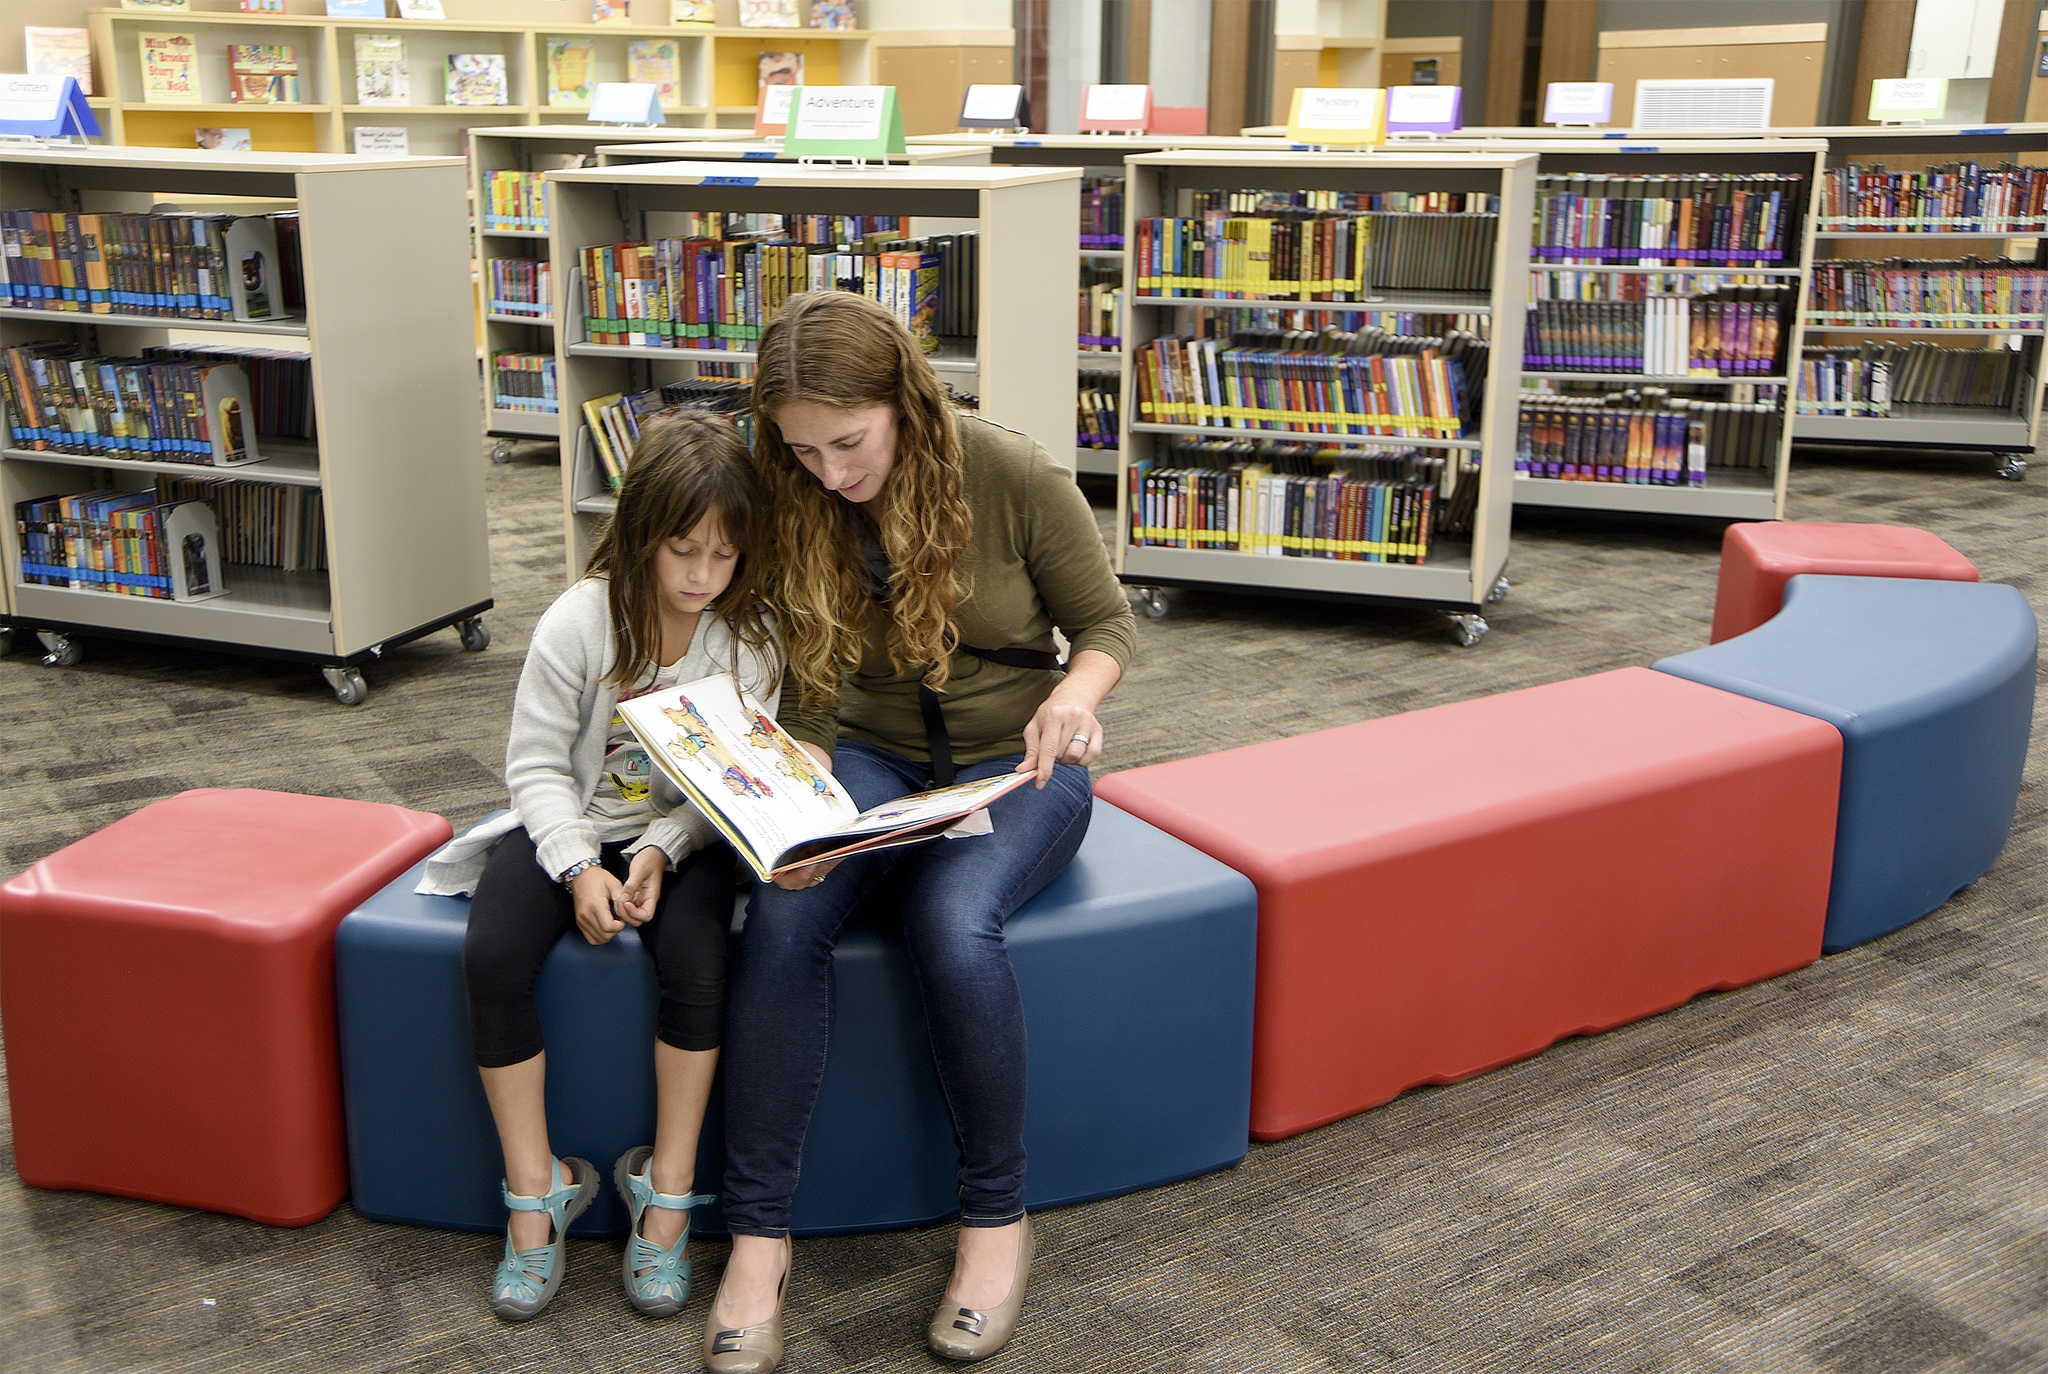 Carol Ladwig/Staff PhotoA mom and daughter were already immersed in a book together in the library as tours of the new Timber Ridge Elementary School began Sept. 8.